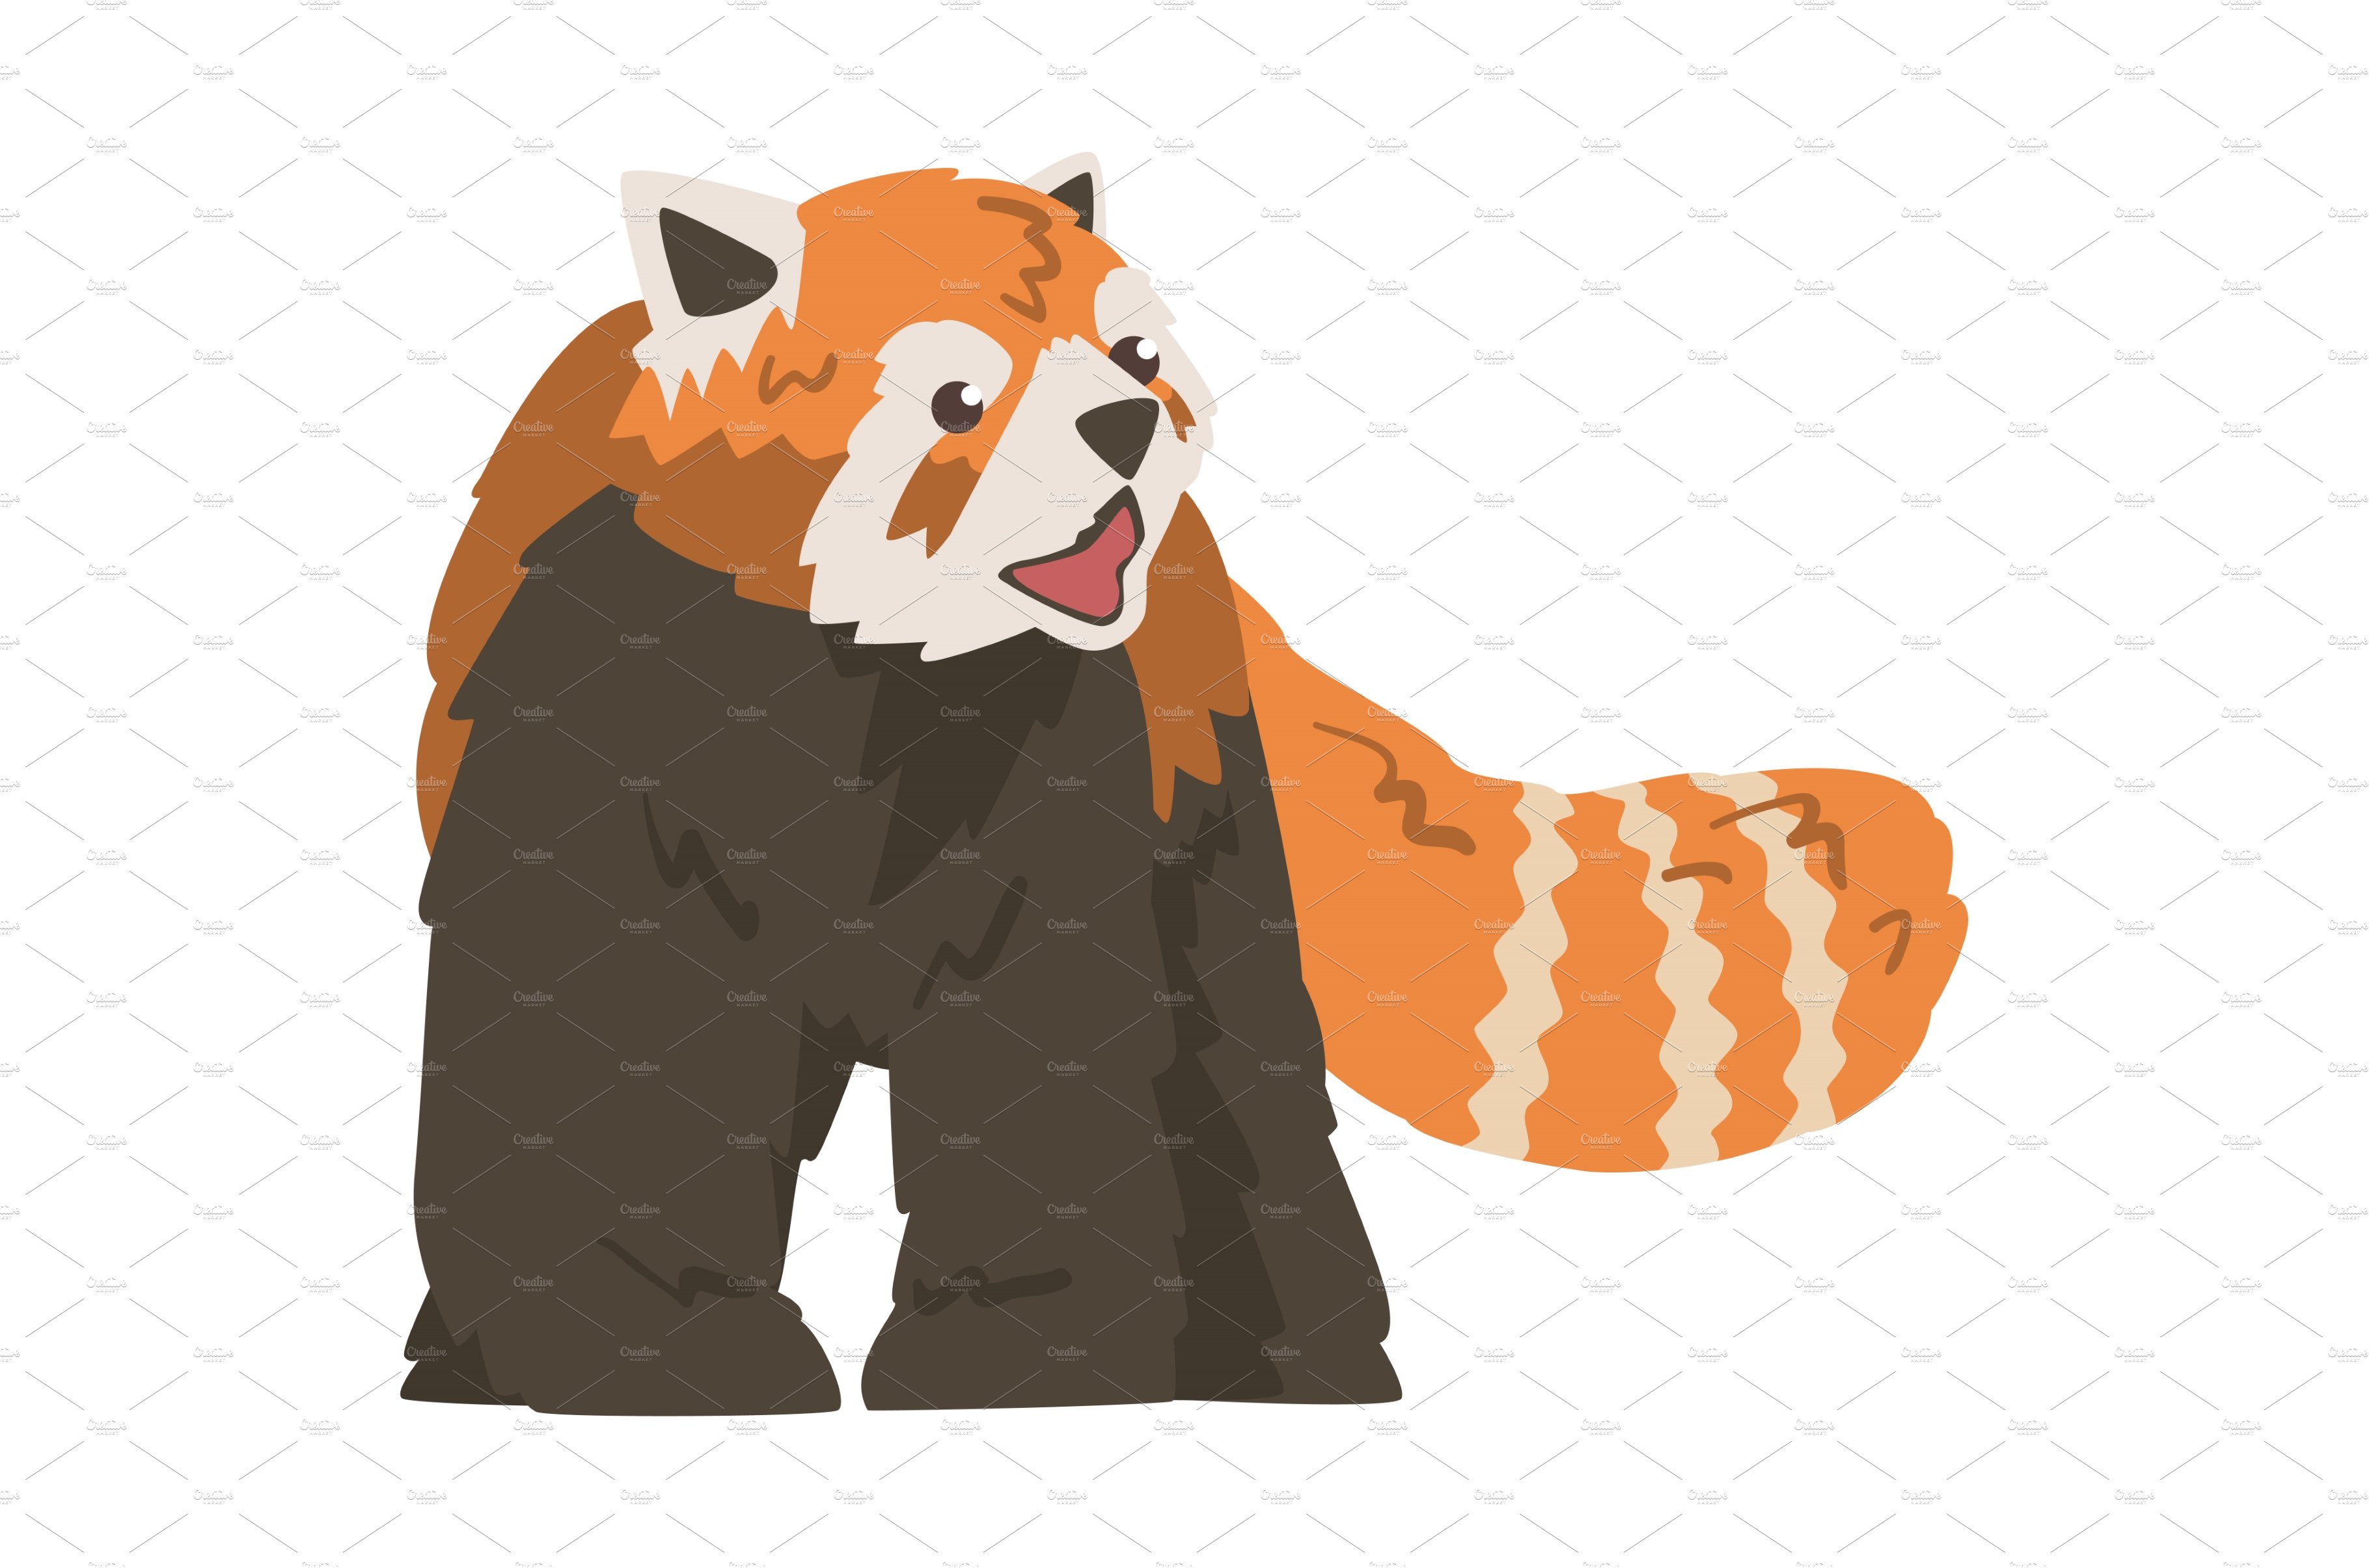 Adorable Cute Red Panda Wild Animal cover image.